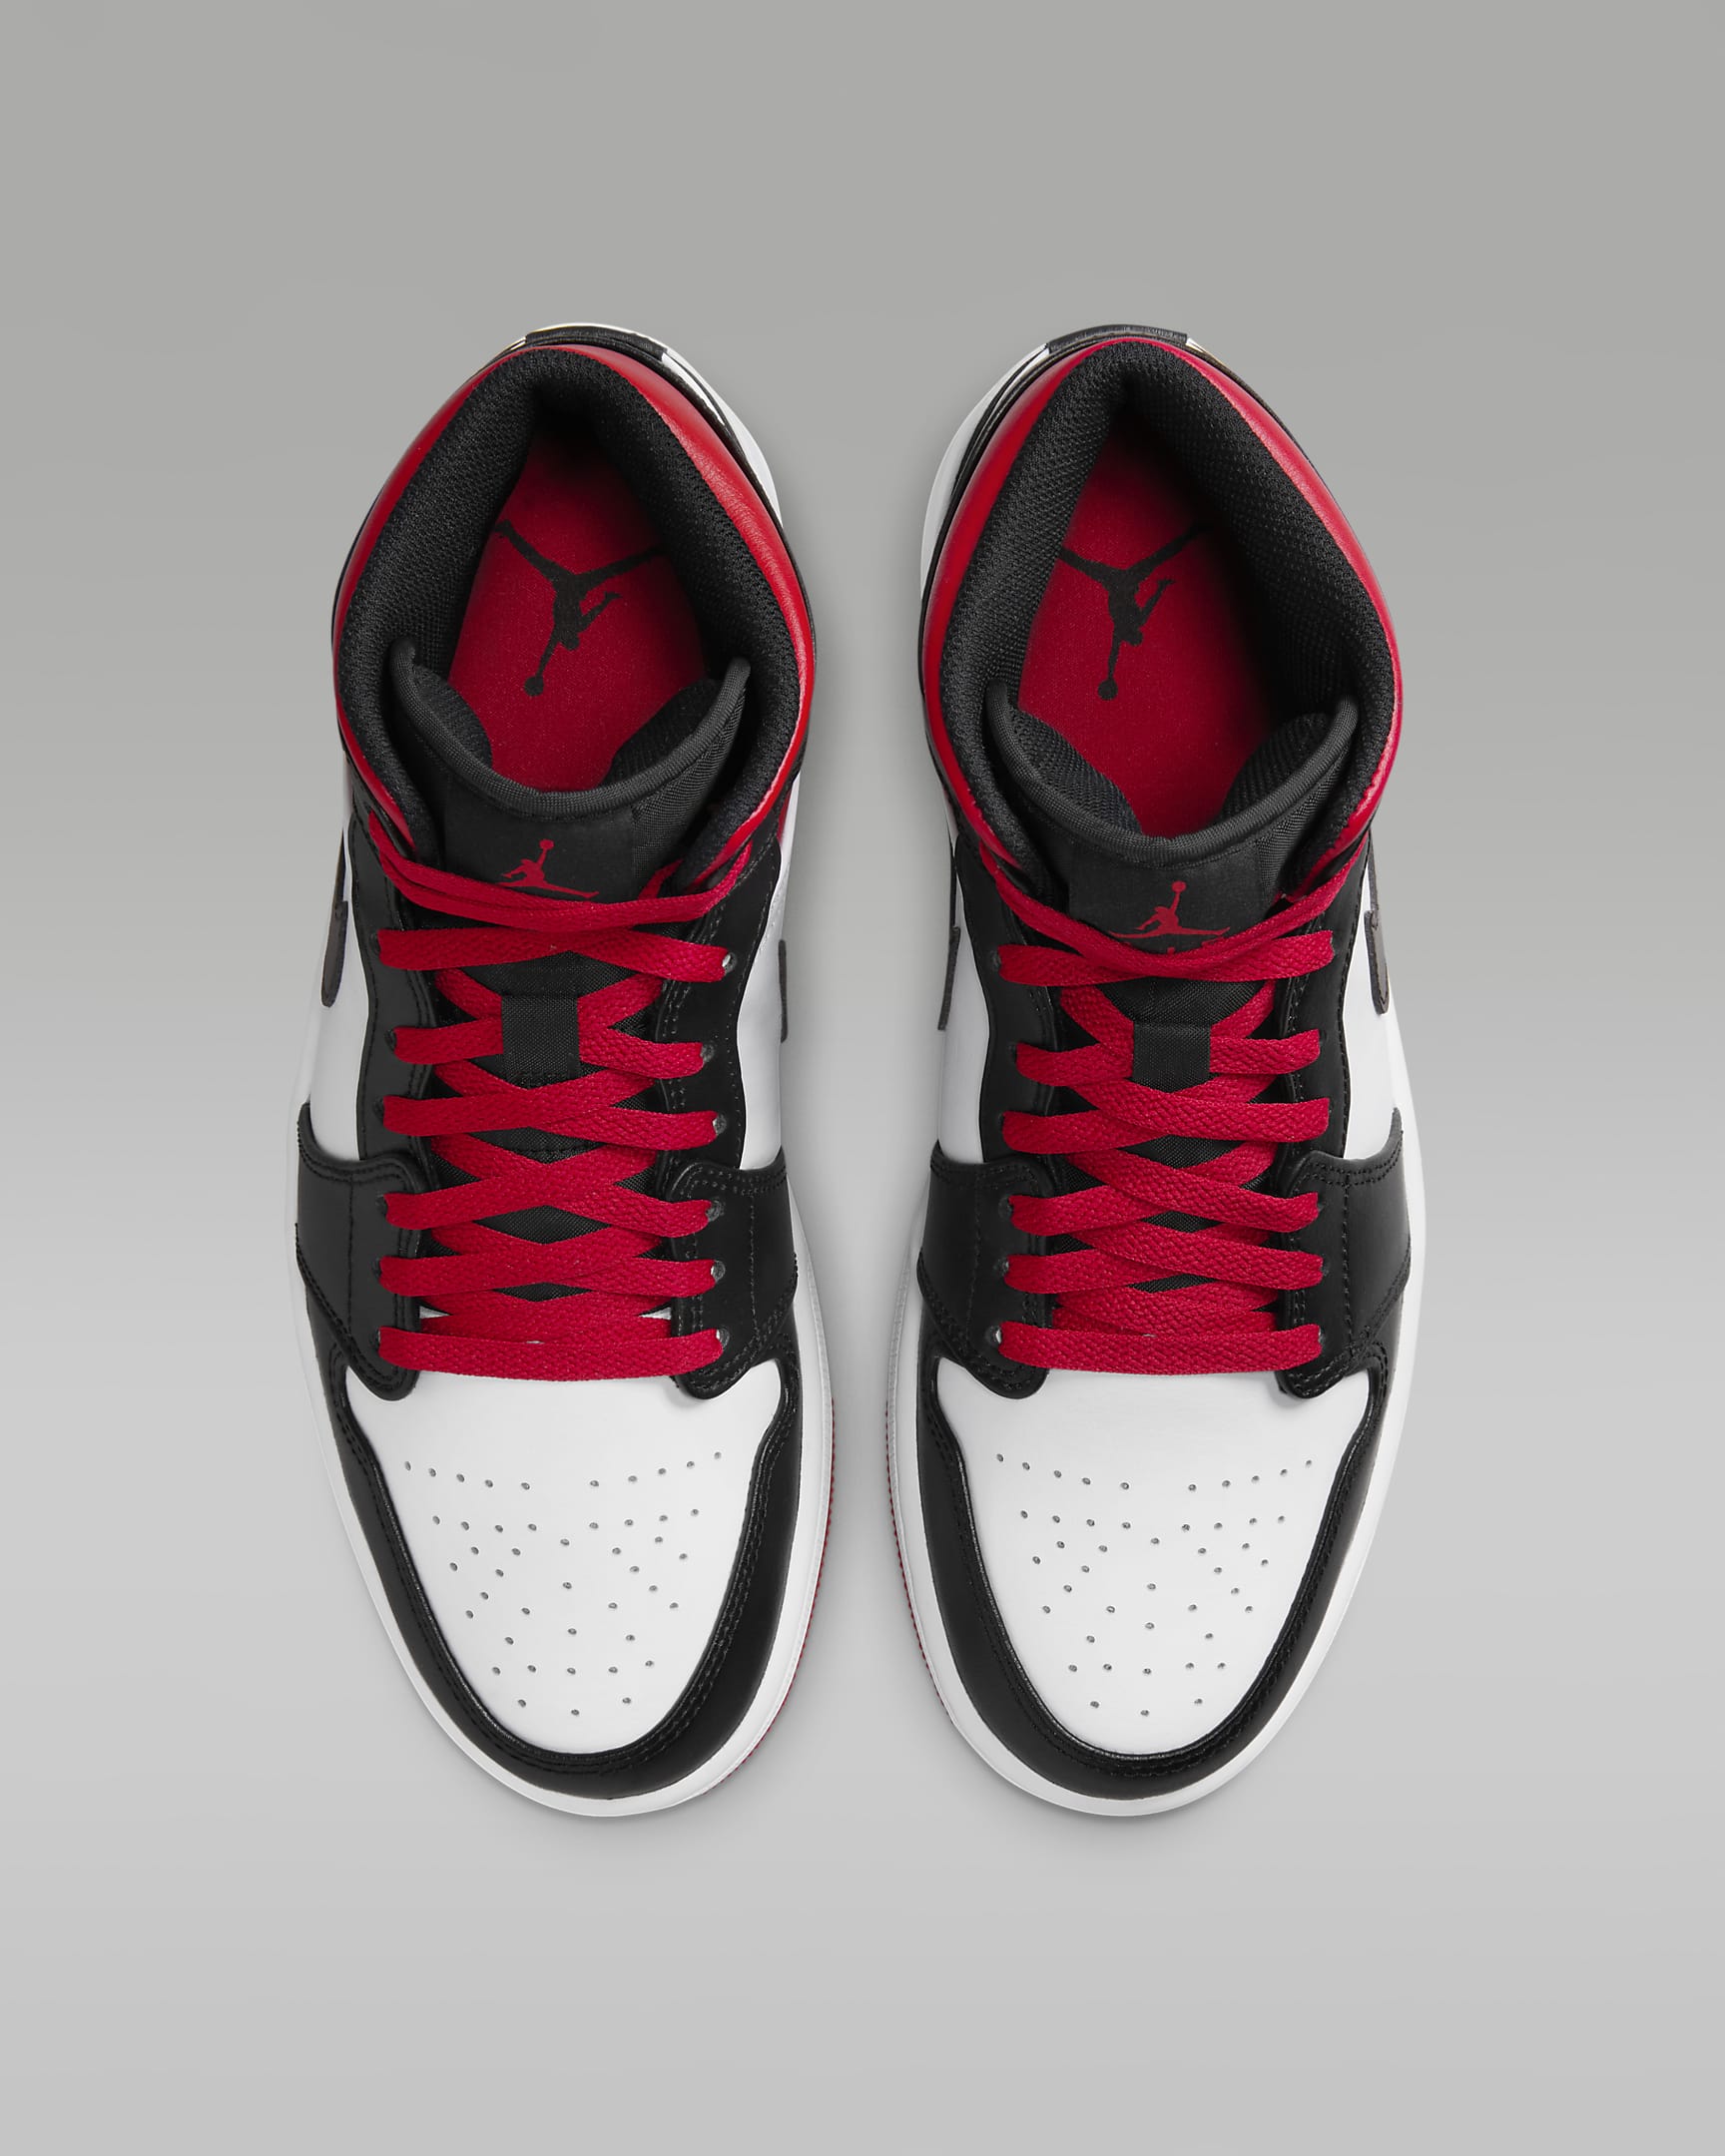 Shoe Game Upgrade: 10 Reasons Why Air Jordan 1 Mid Men’s Shoes Are a Must-Have!